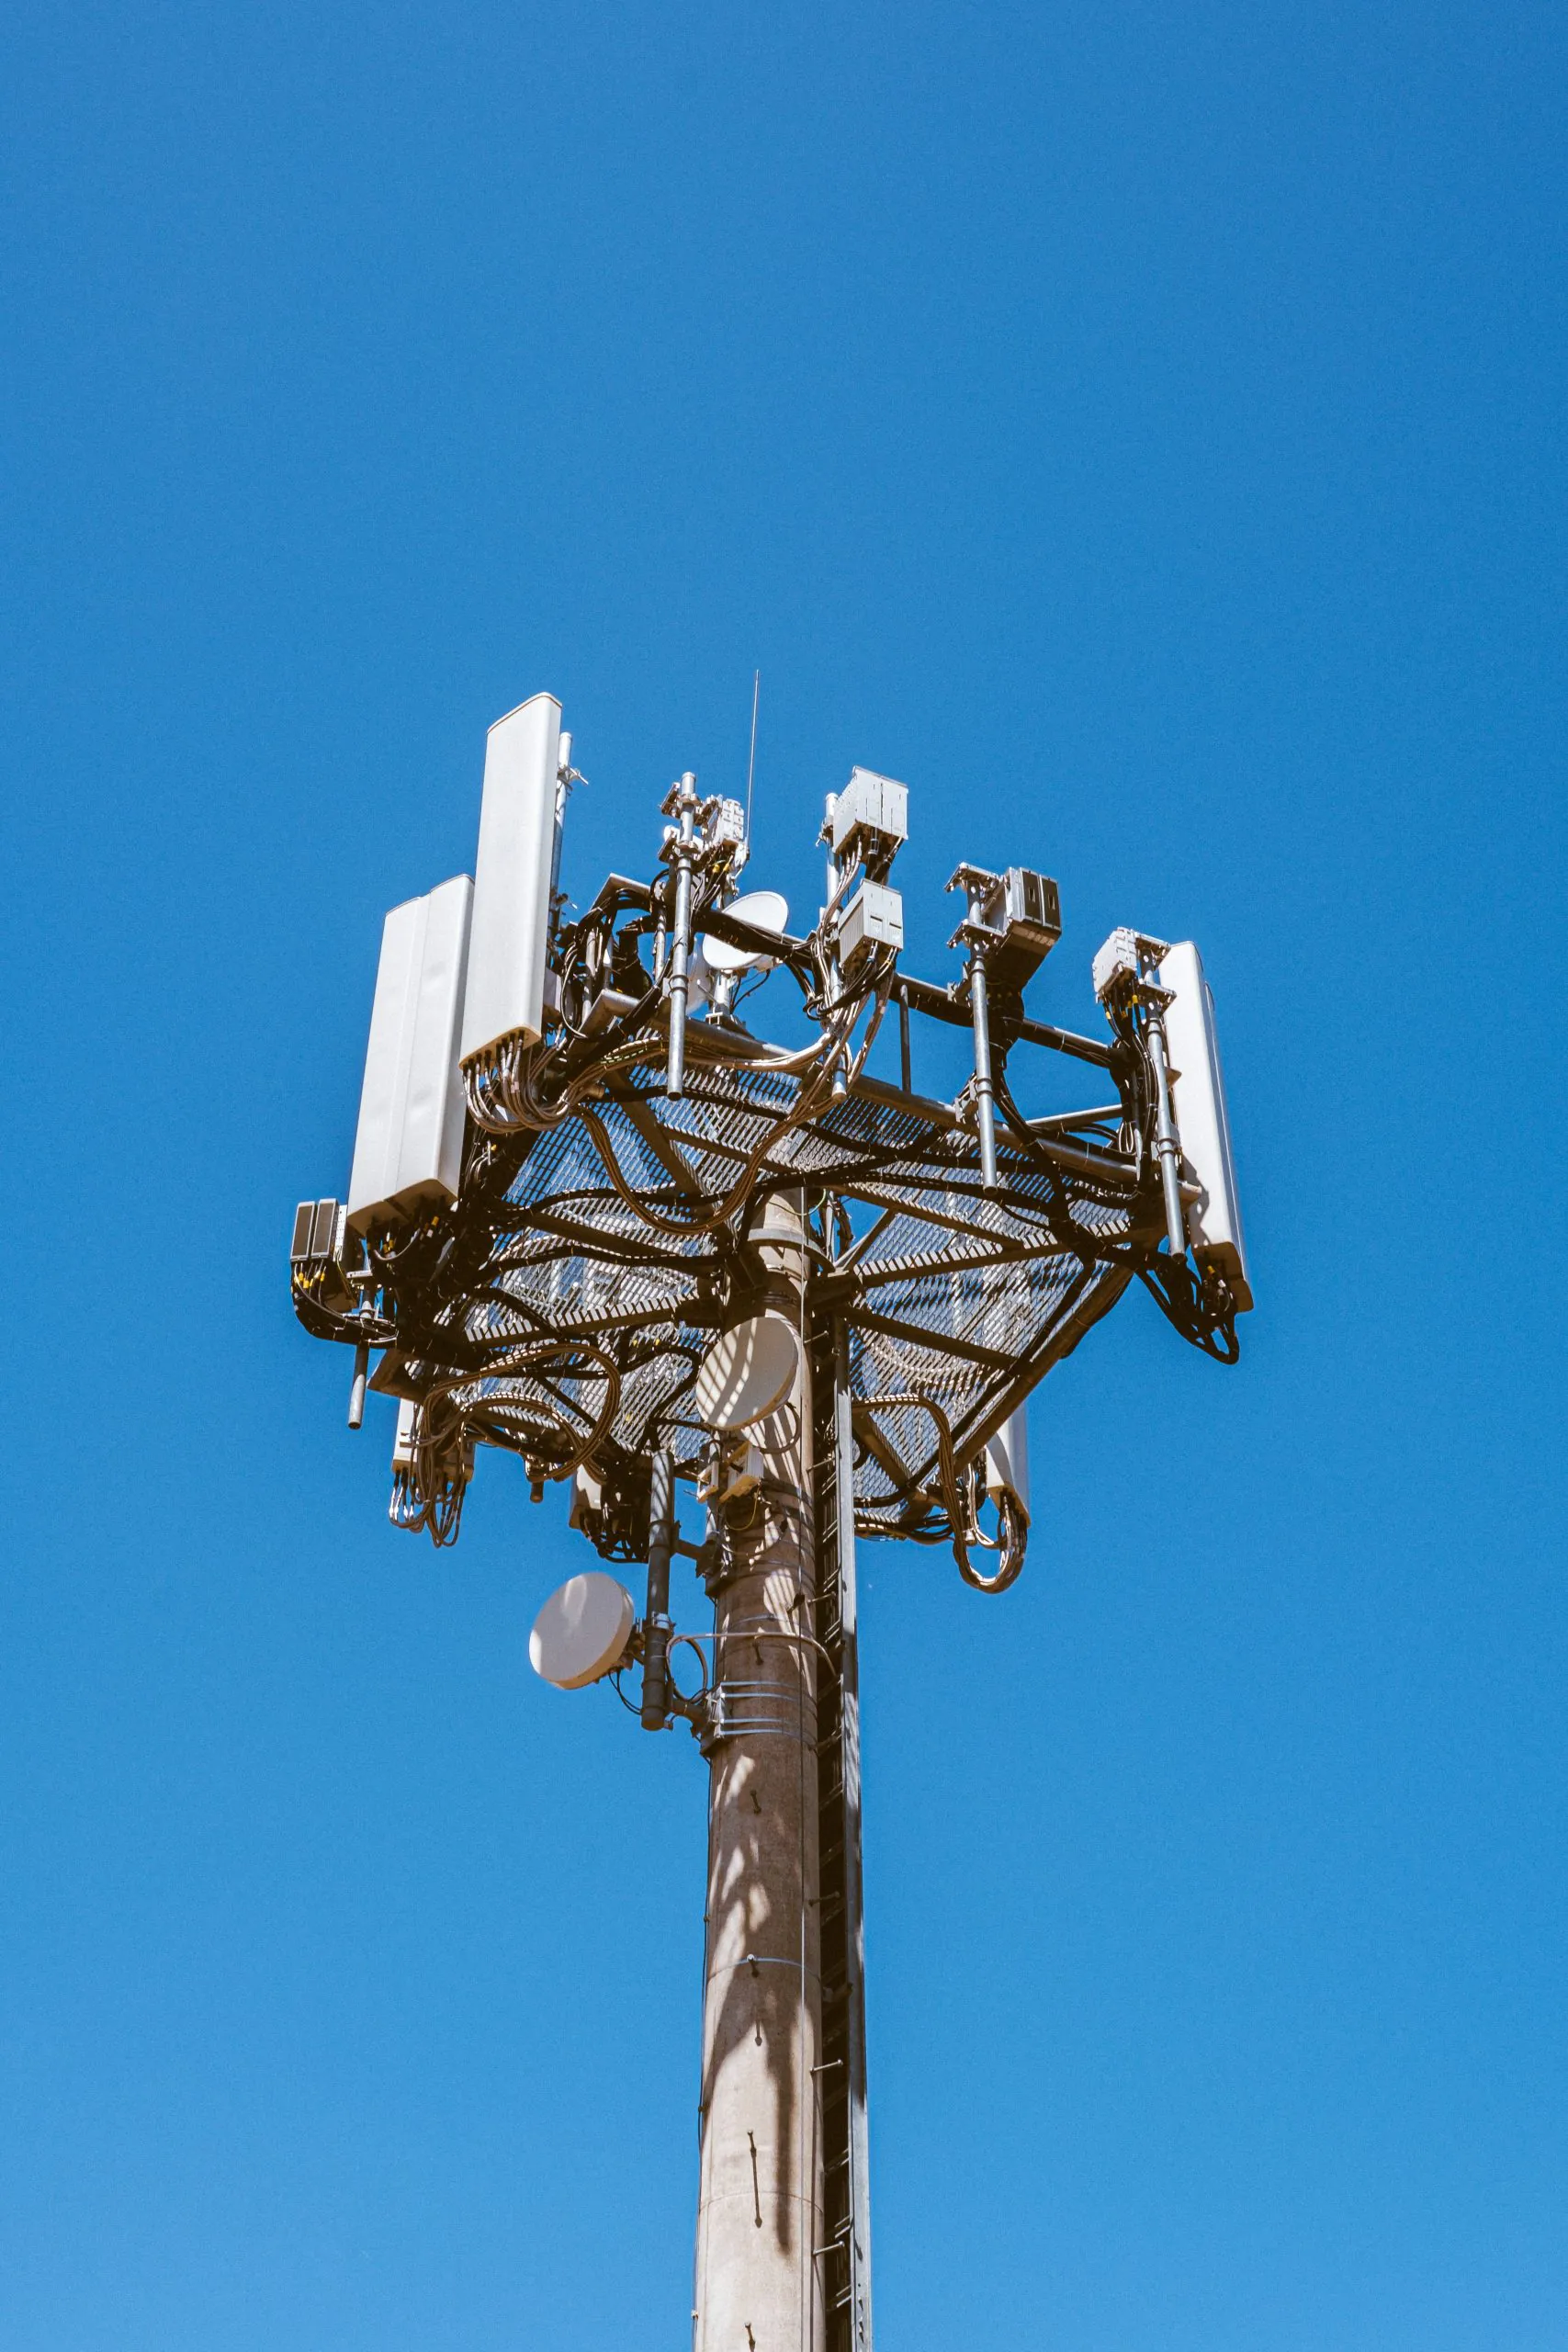 Making Way for the New Normal and Overcoming Challenges in the Telecom Industry